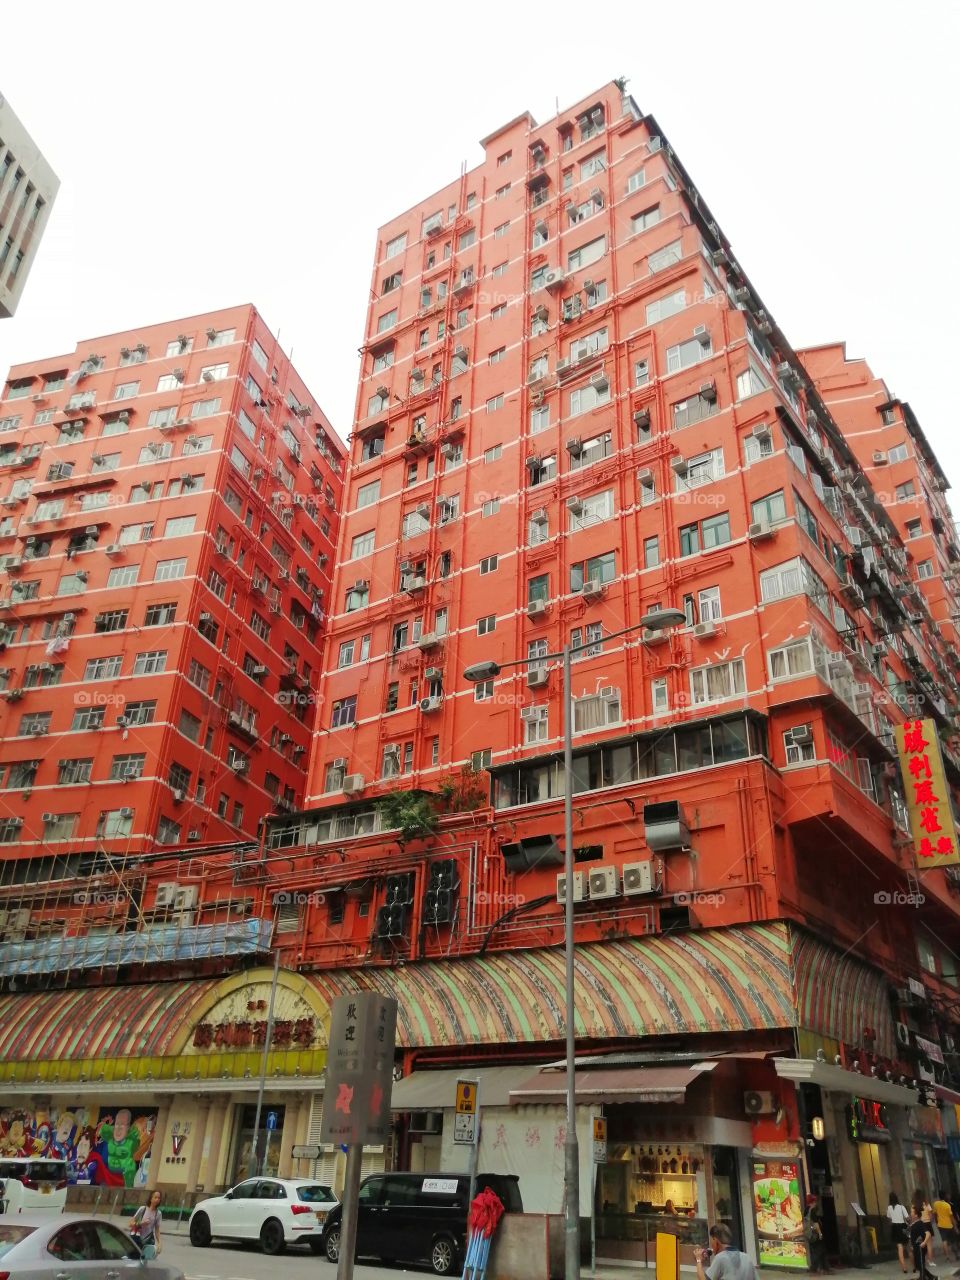 Residential property in the Yau Ma Tei District of Hong Kong